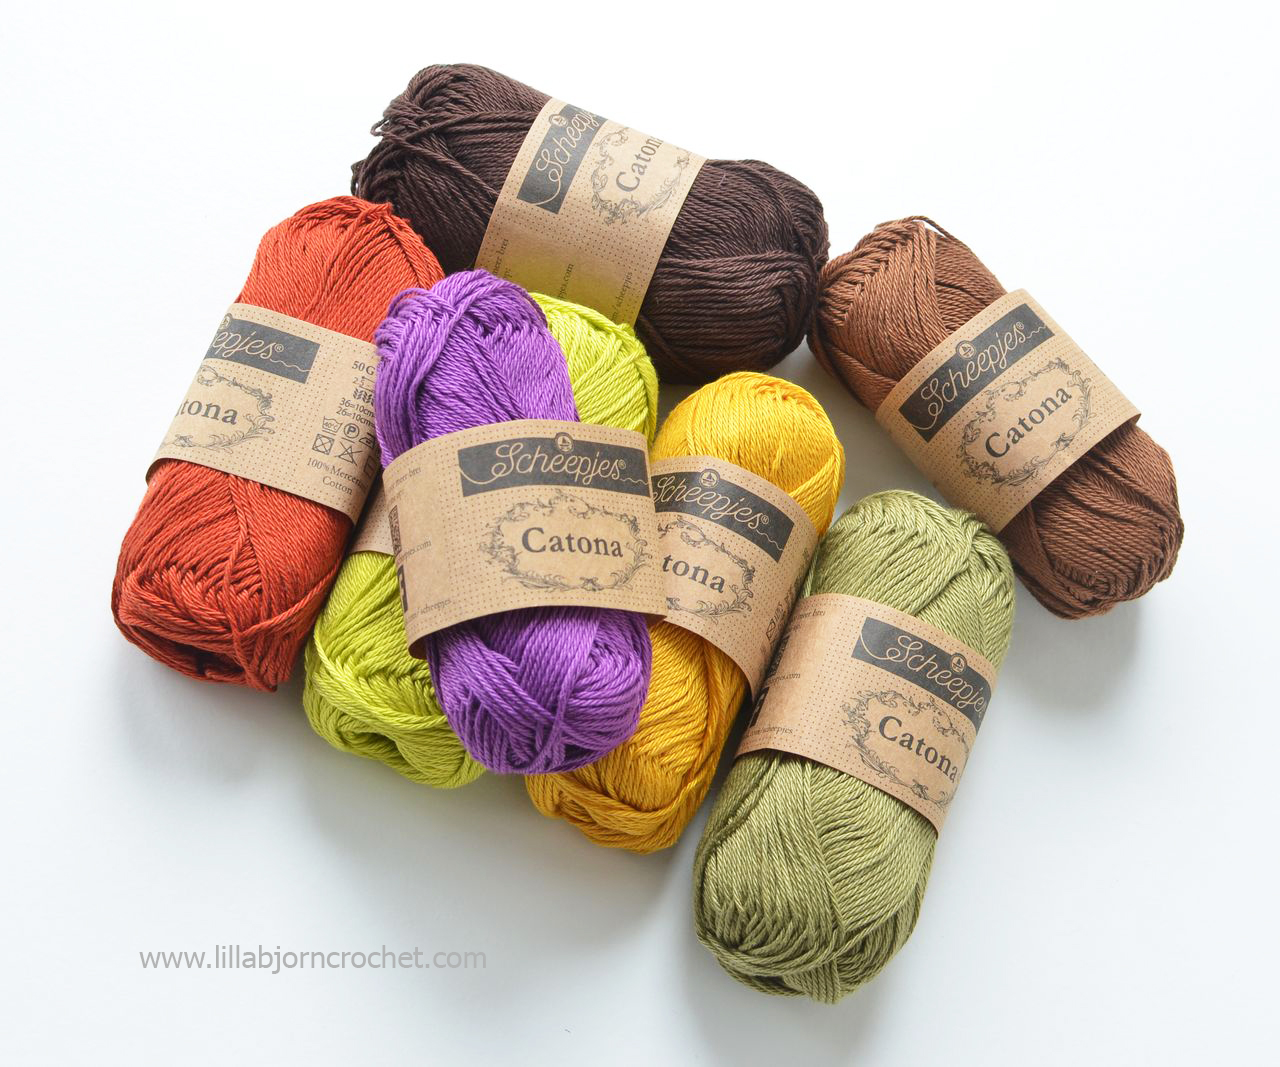 Which yarns are best for overlay crochet: review on Catona by